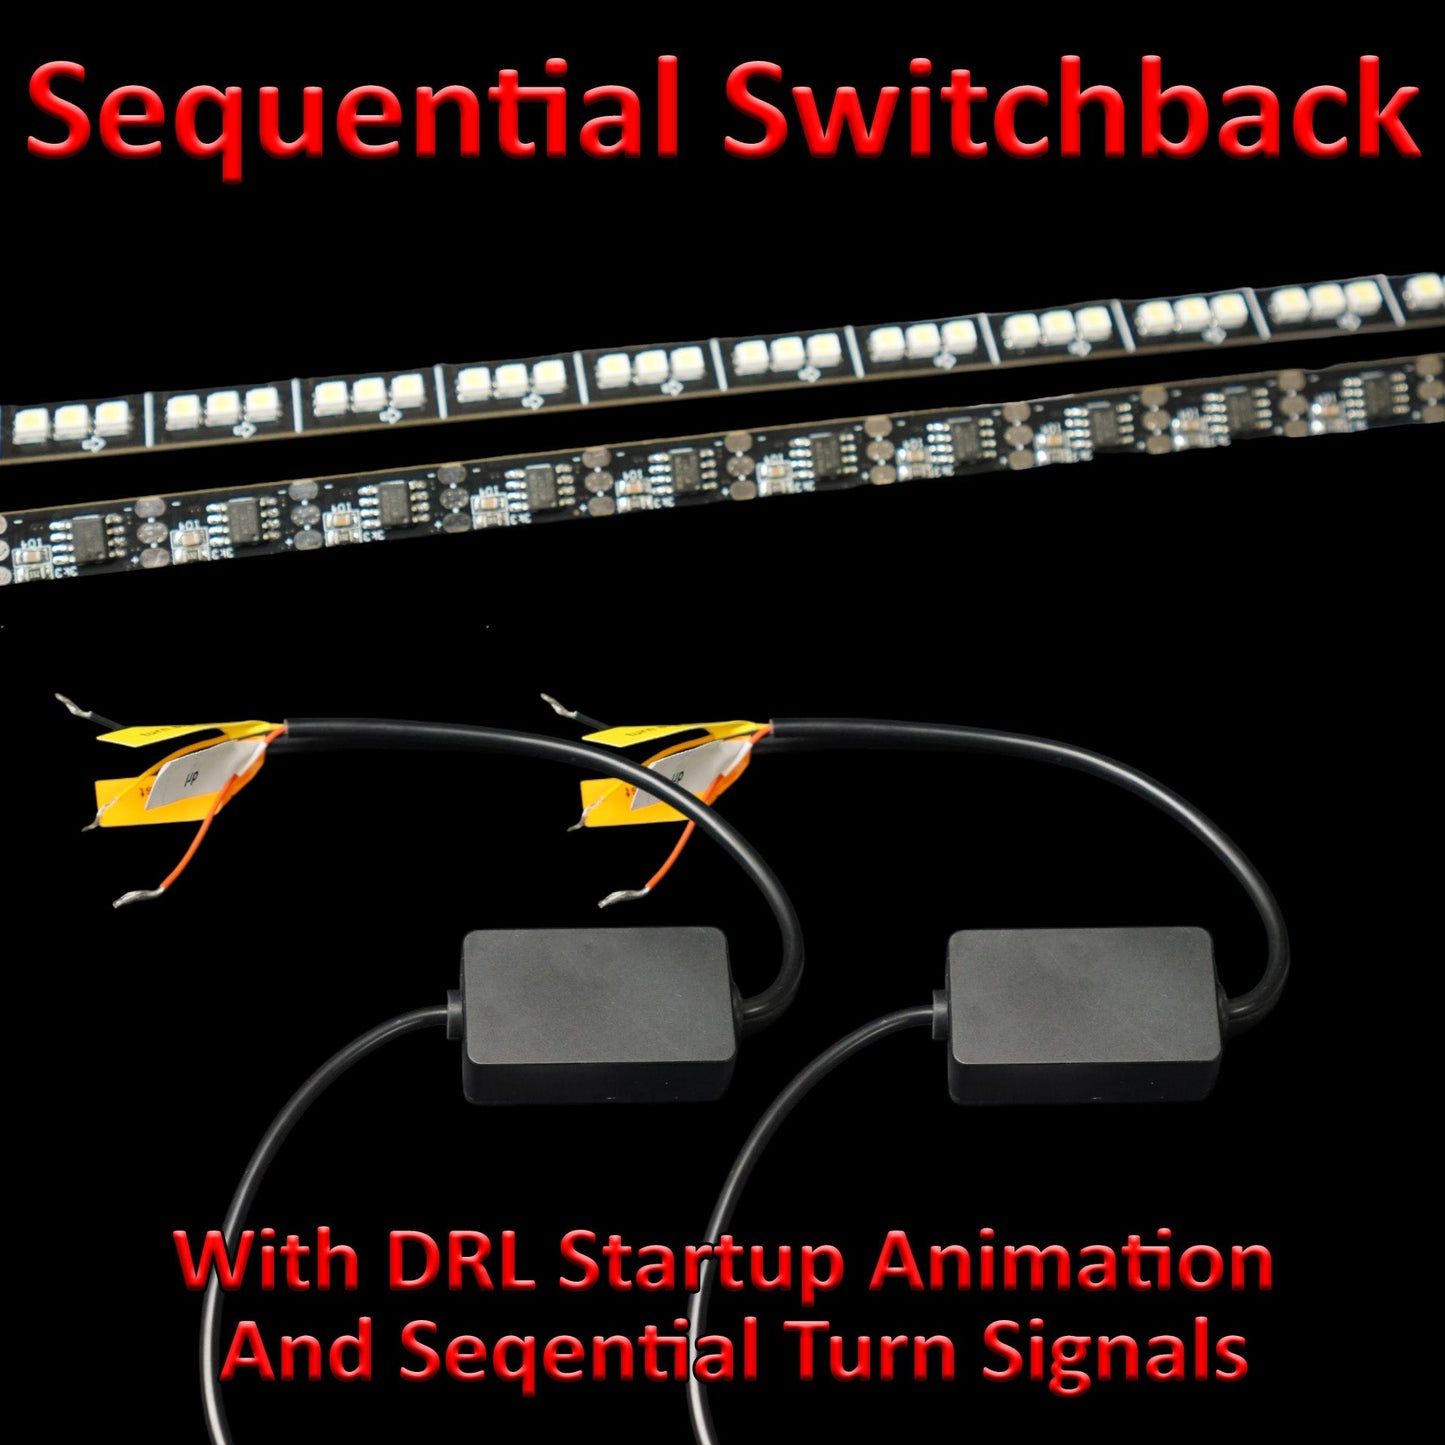 Shapeable Sequential Switchback Strips W/ Startup